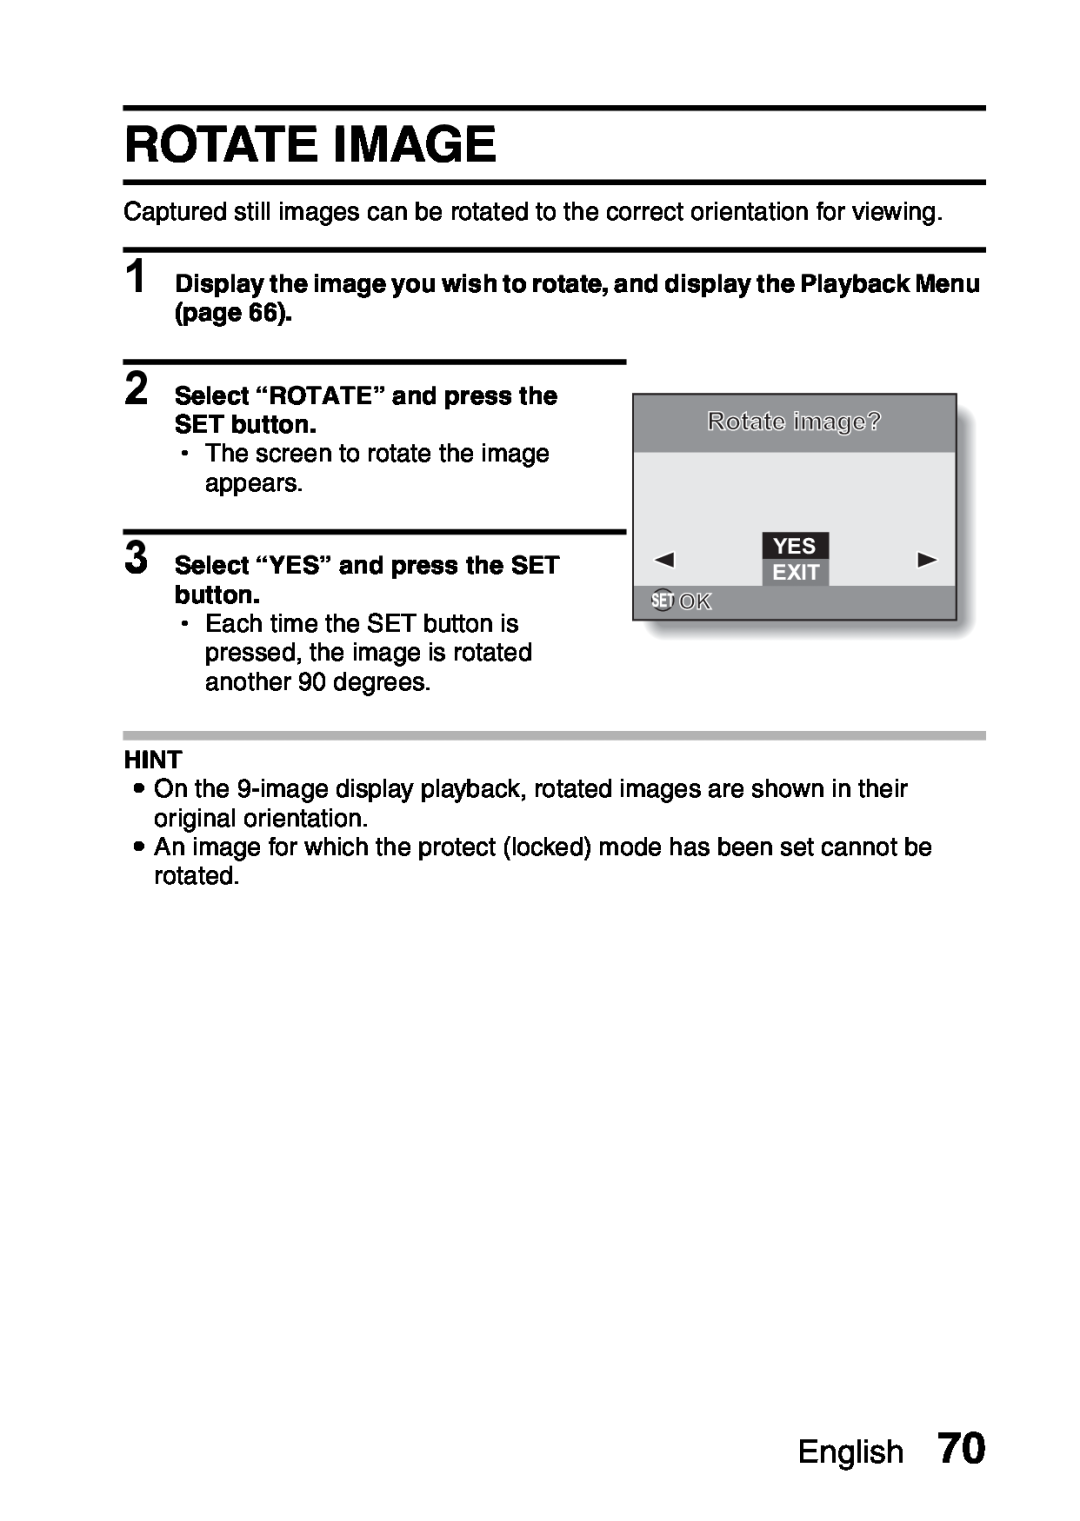 Sanyo VPC-S60 instruction manual Rotate Image, Select “ROTATE” and press the SET button, Rotate image?, English, Hint 